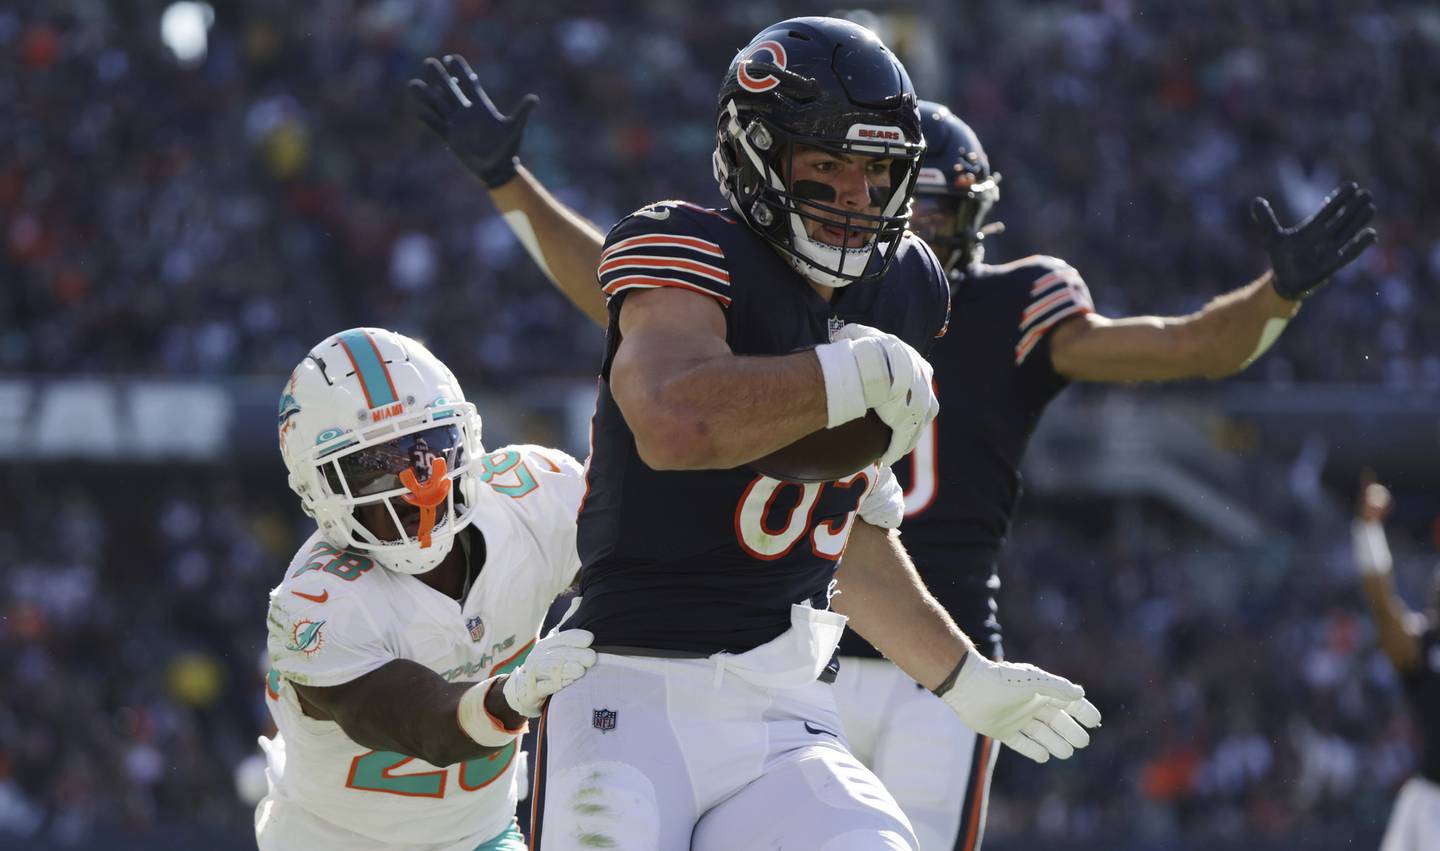 Bears tight end Cole Kmet (85) scores a touchdown in the second quarter against the Dolphins on Sunday, Nov. 6, 2022, at Soldier Field.